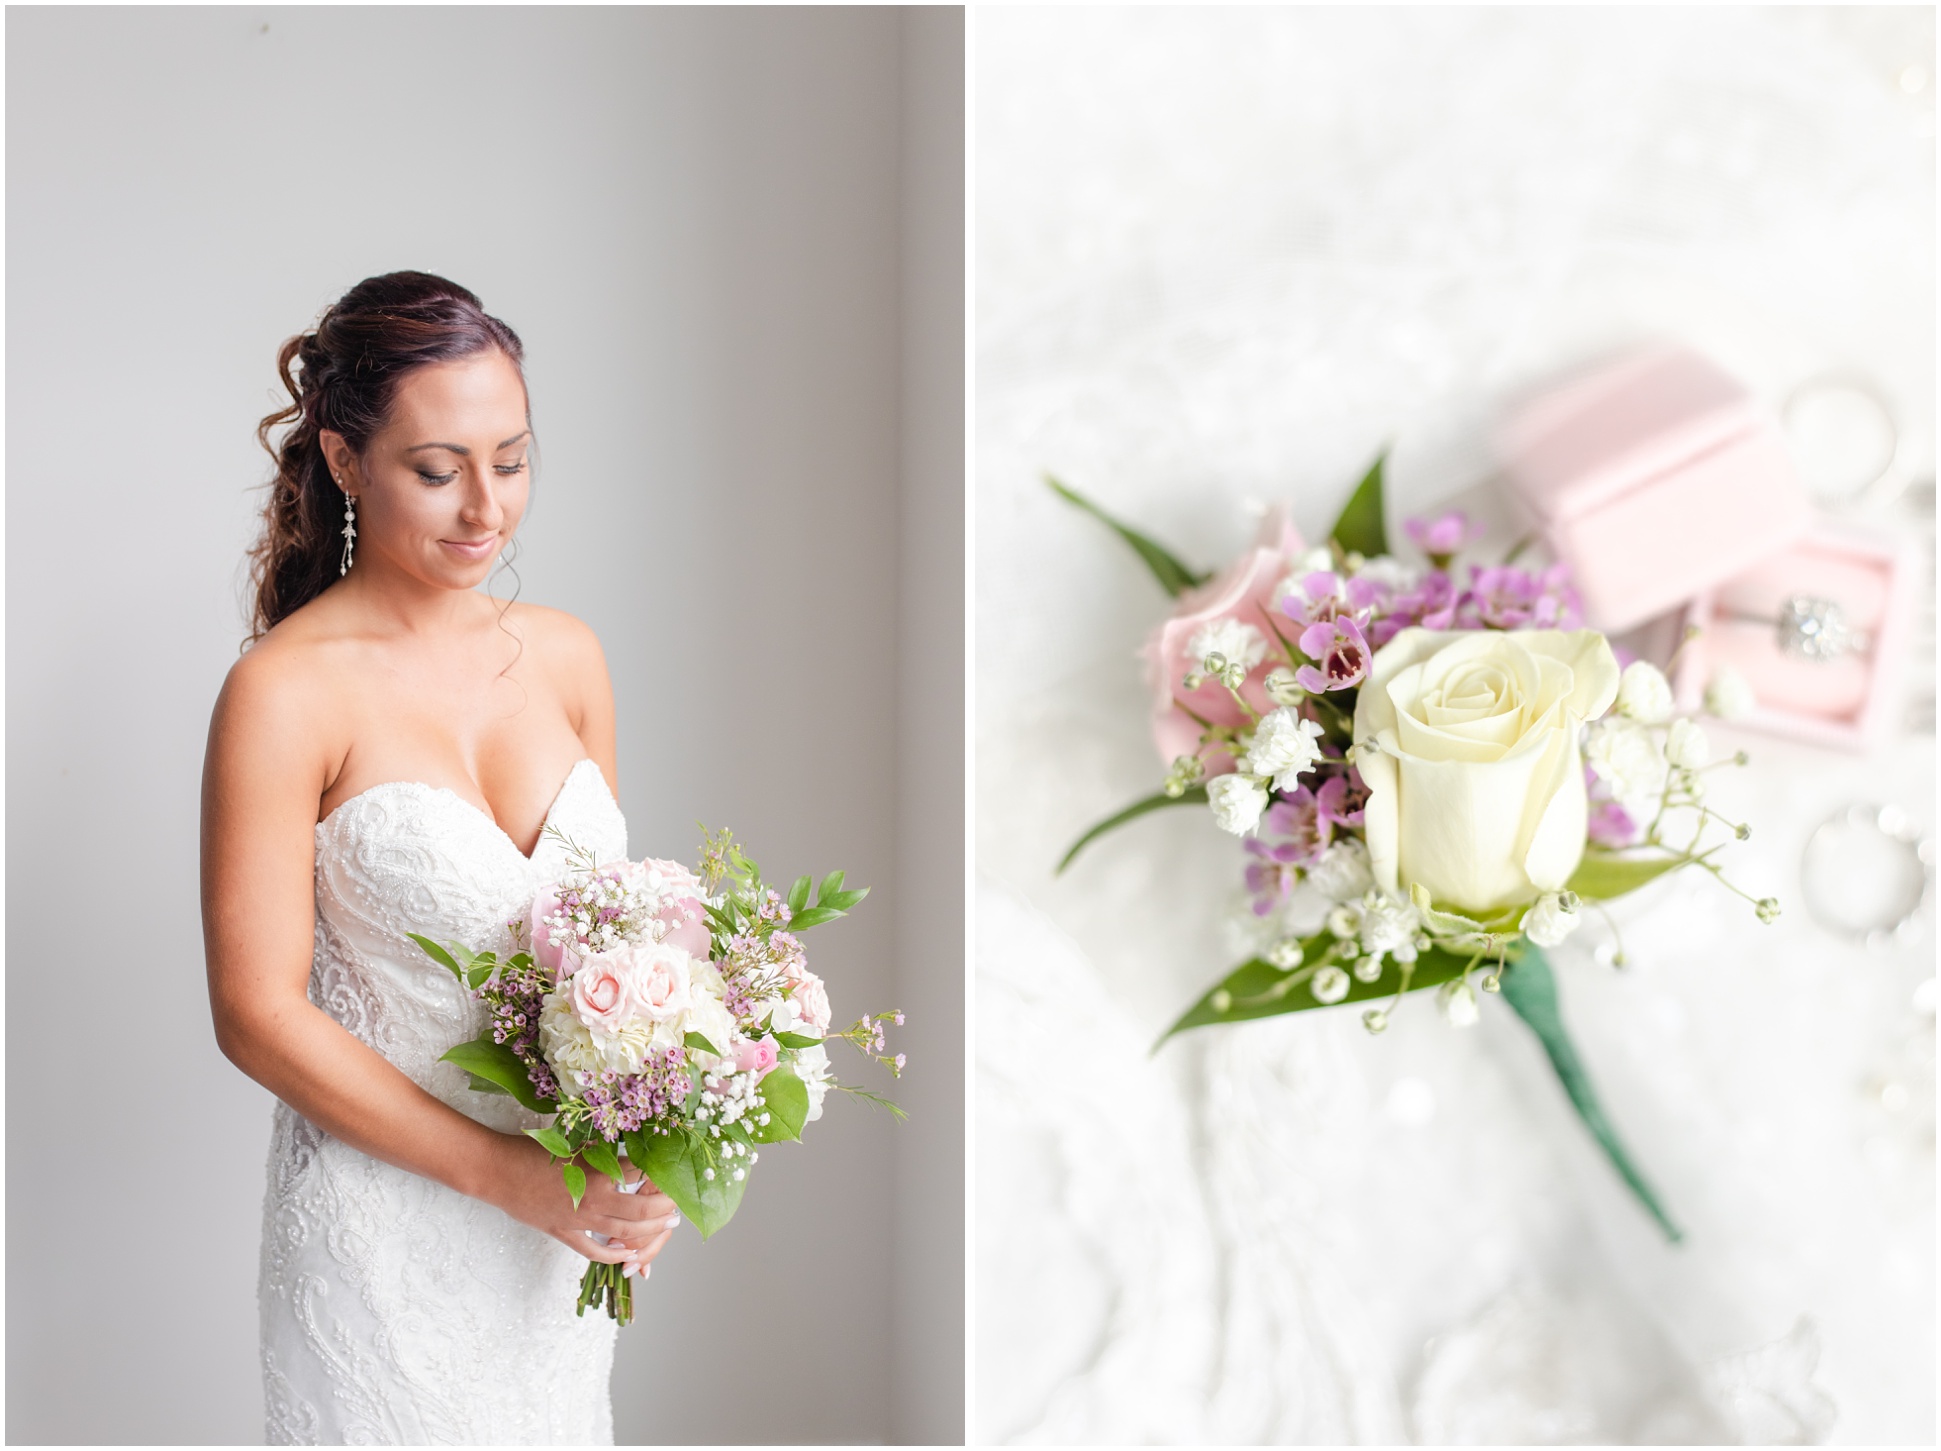 Left: Bride looking down at bouquet, right: the groom's boutonniere 